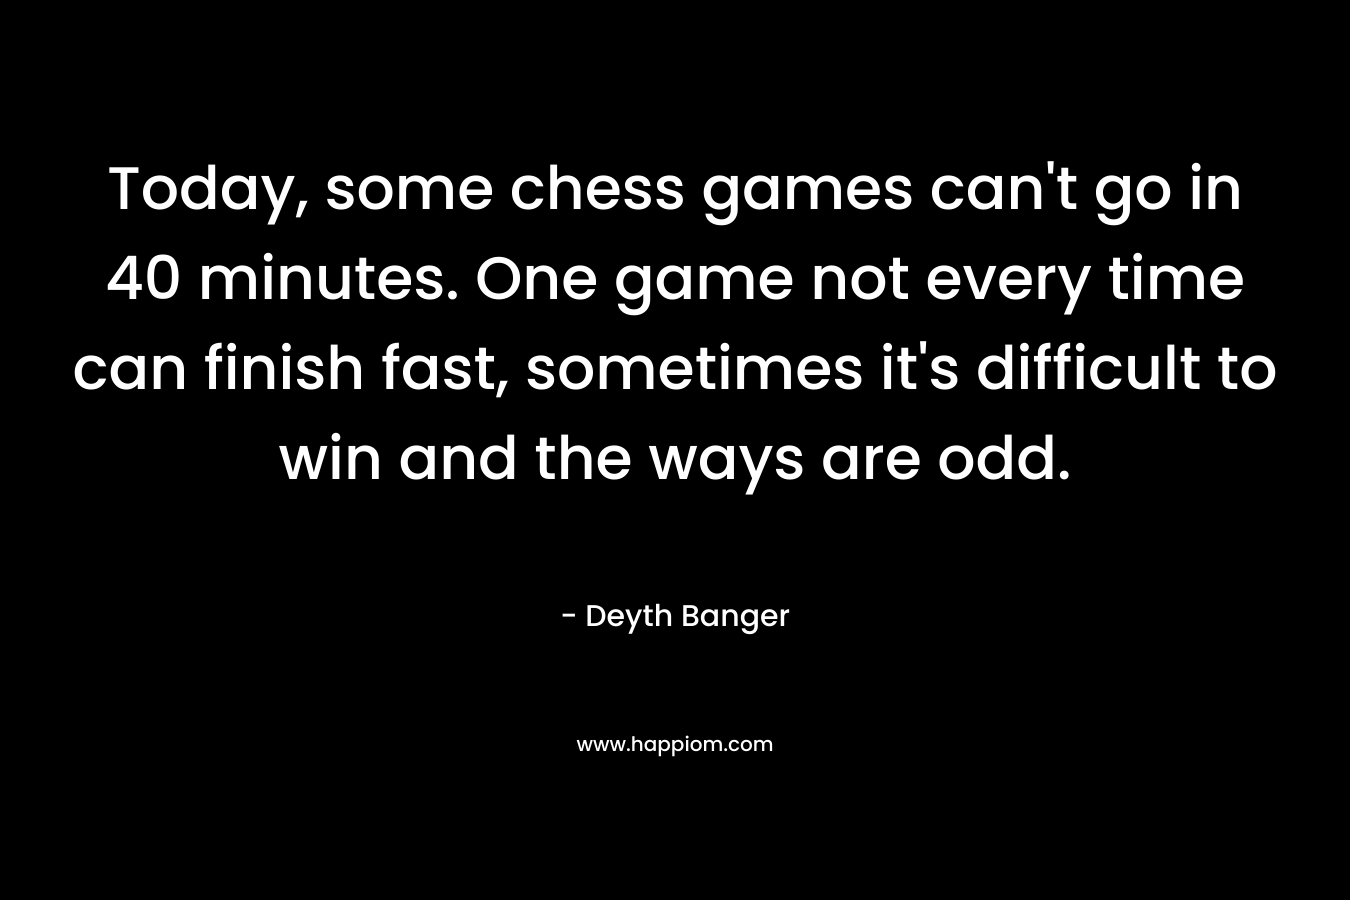 Today, some chess games can't go in 40 minutes. One game not every time can finish fast, sometimes it's difficult to win and the ways are odd.